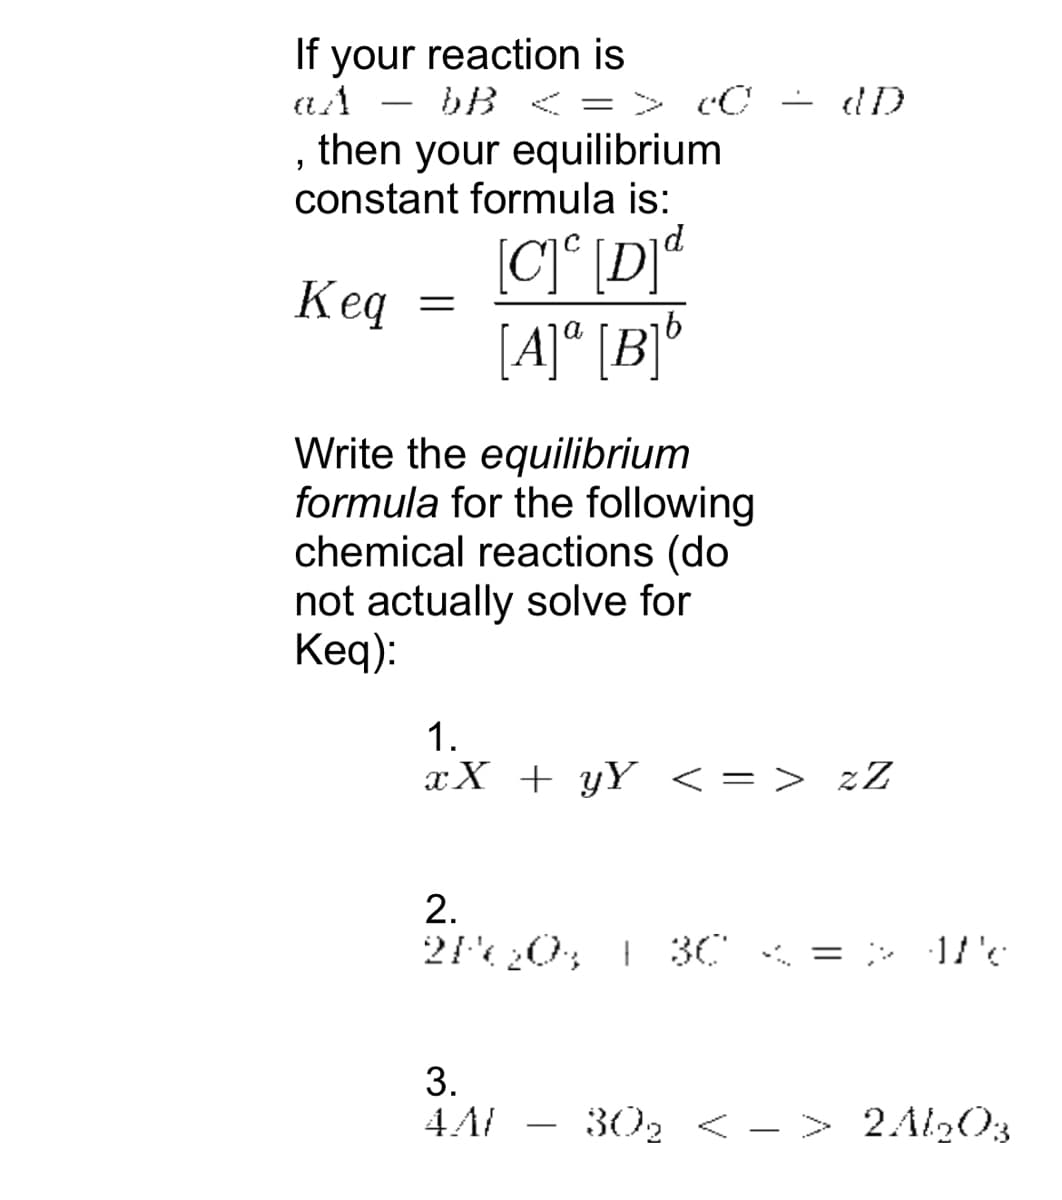 If your reaction is
az
bB <
=
=> c0 = dD
, then your equilibrium
constant formula is:
Keq
=
[C]c [D]d
[A]ª[B]b
Write the equilibrium
formula for the following
chemical reactions (do
not actually solve for
Keq):
1.
xX + y¥ < => zZ
2.
2P60% | 30
3.
4A/
30₂ < > 2Al2O3